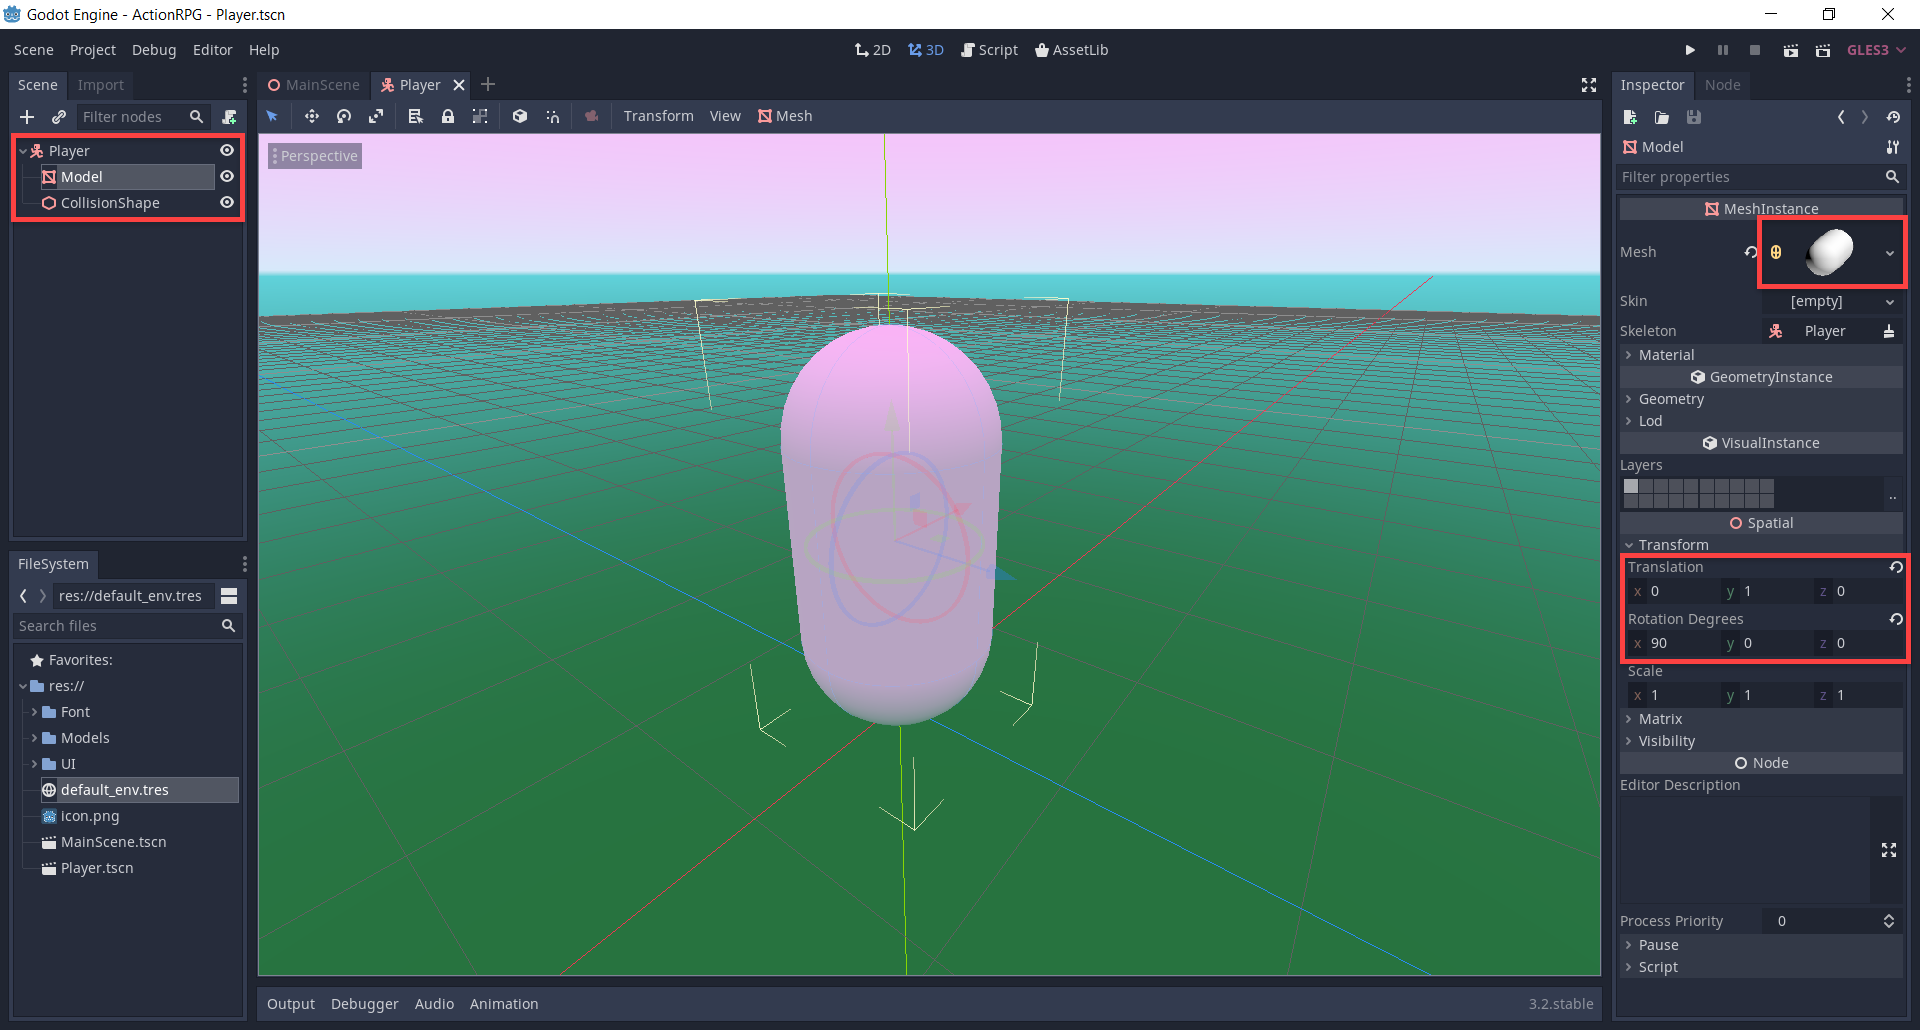 Capsule model in Godot created to stand in for the player